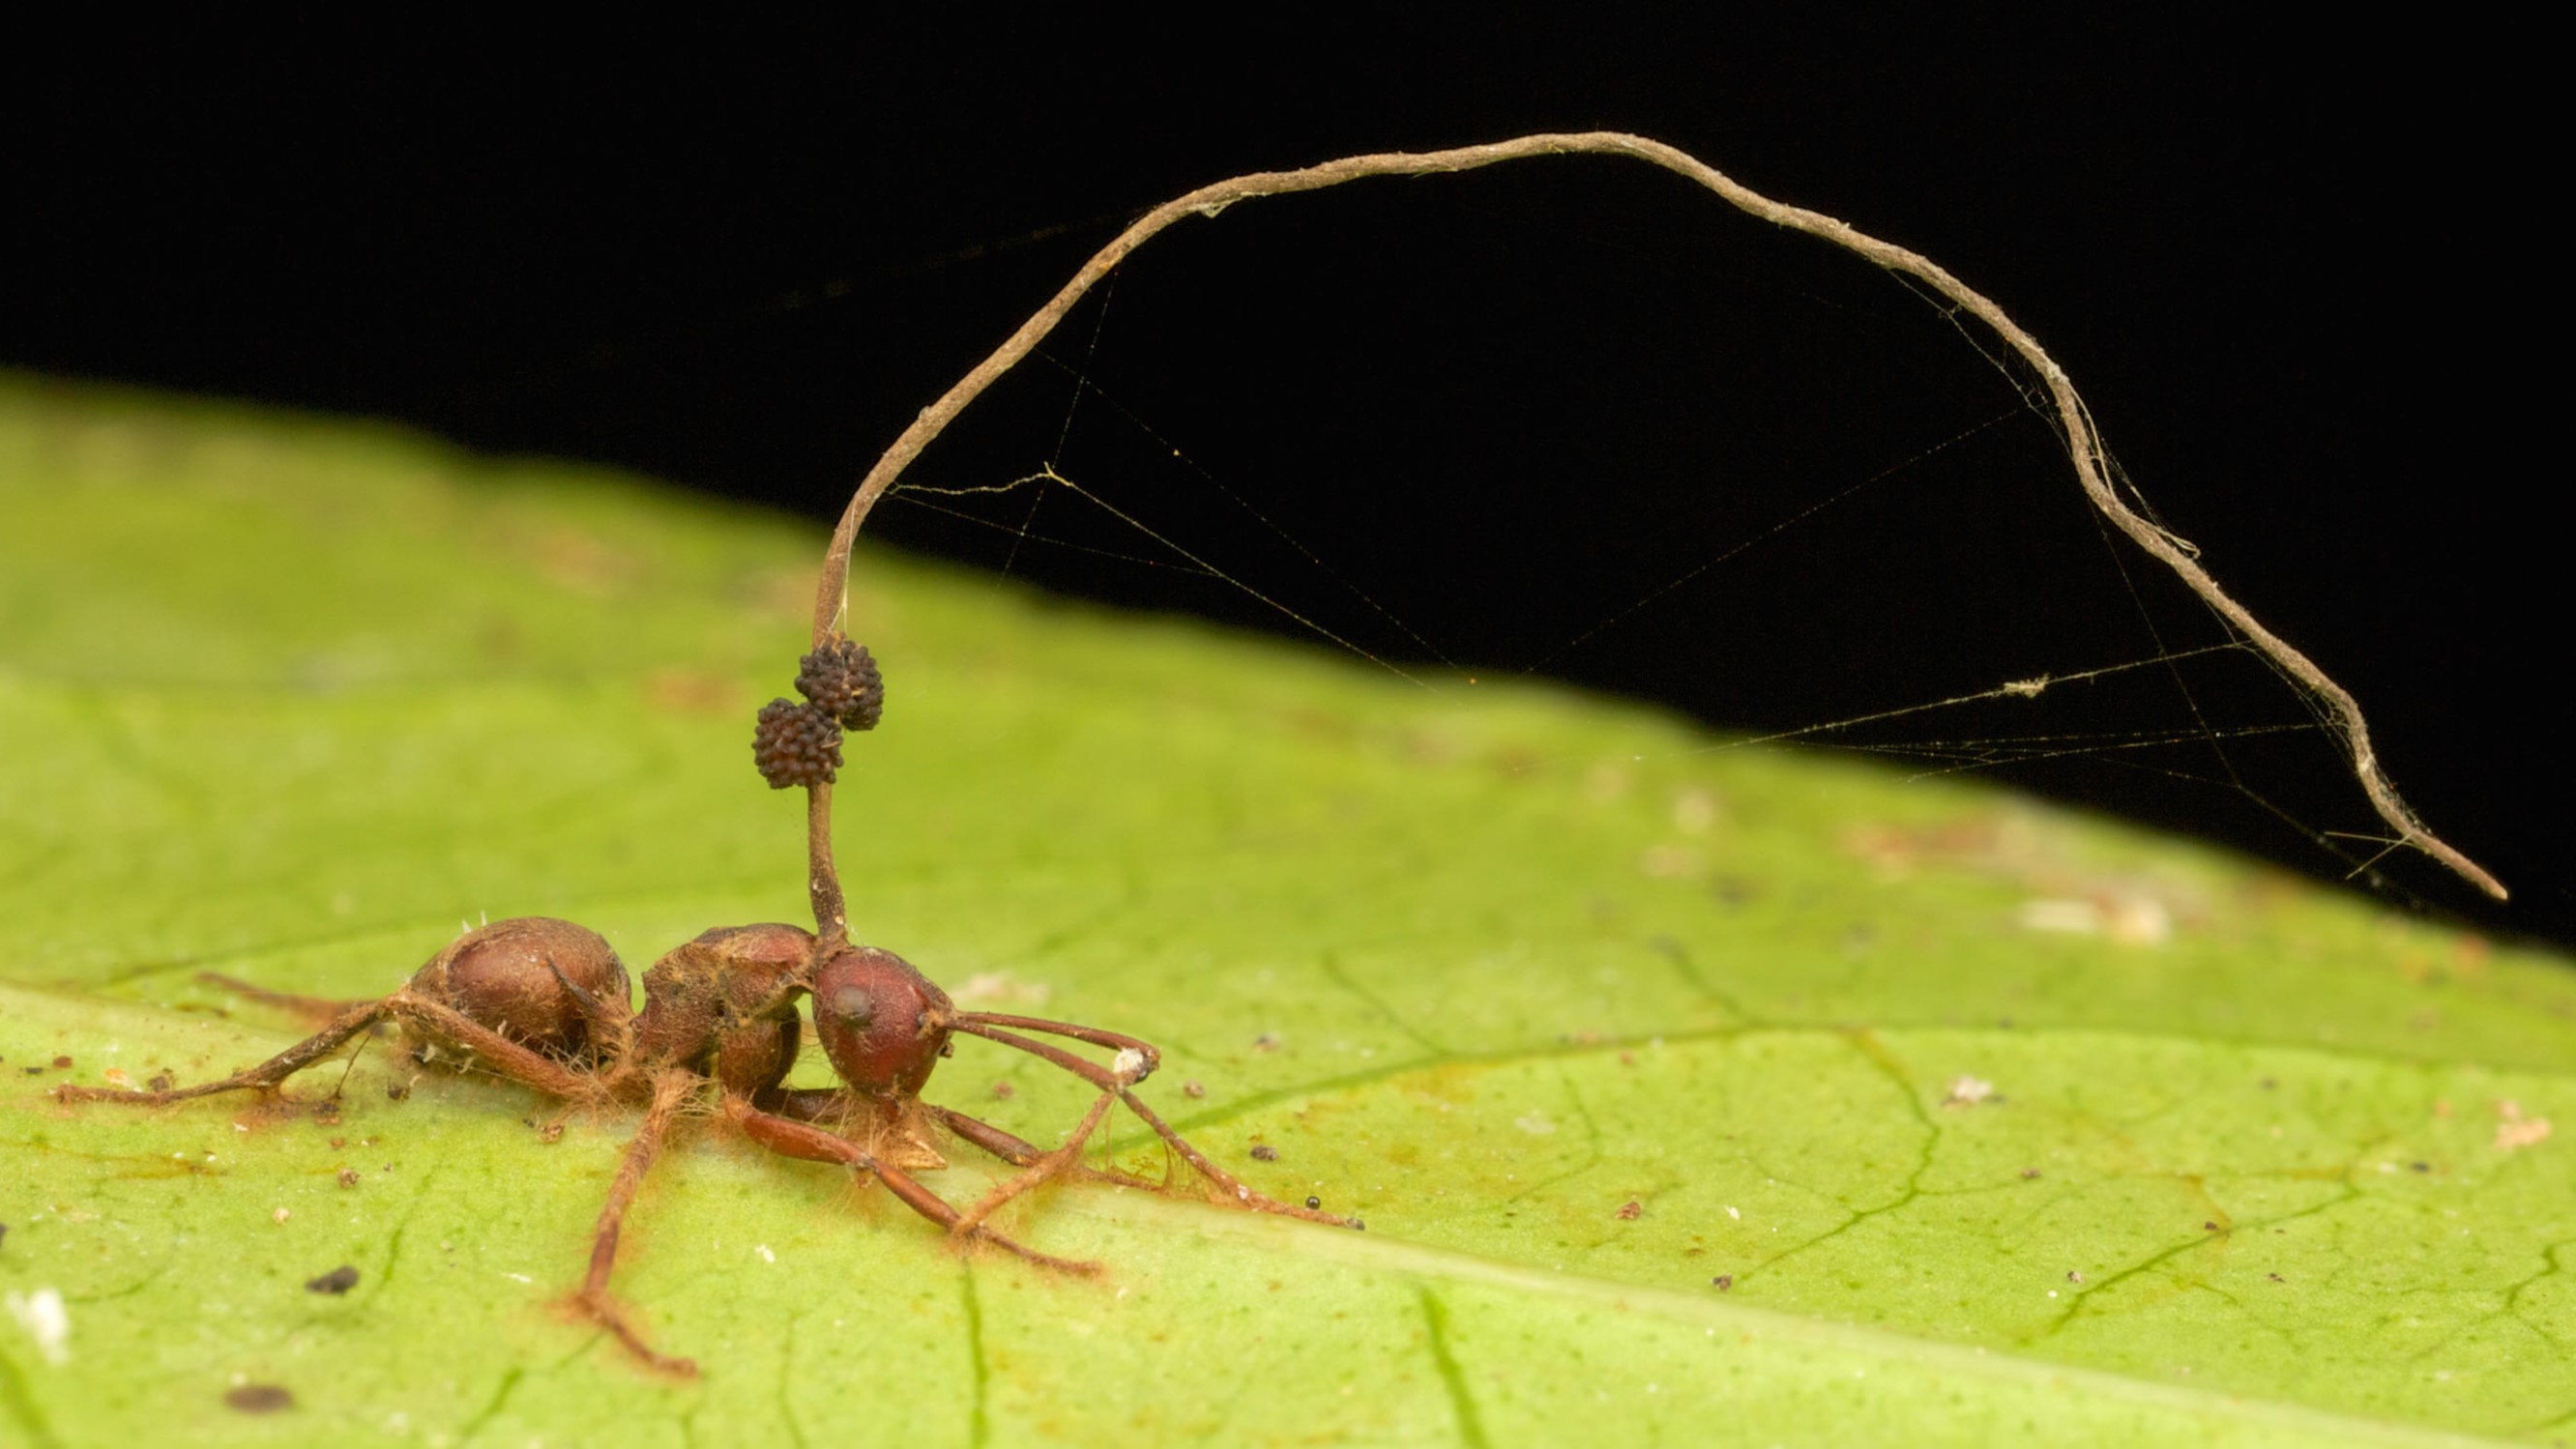 A dead ant on a leaf with a parasitic fungus bursting from its body and arching up and over